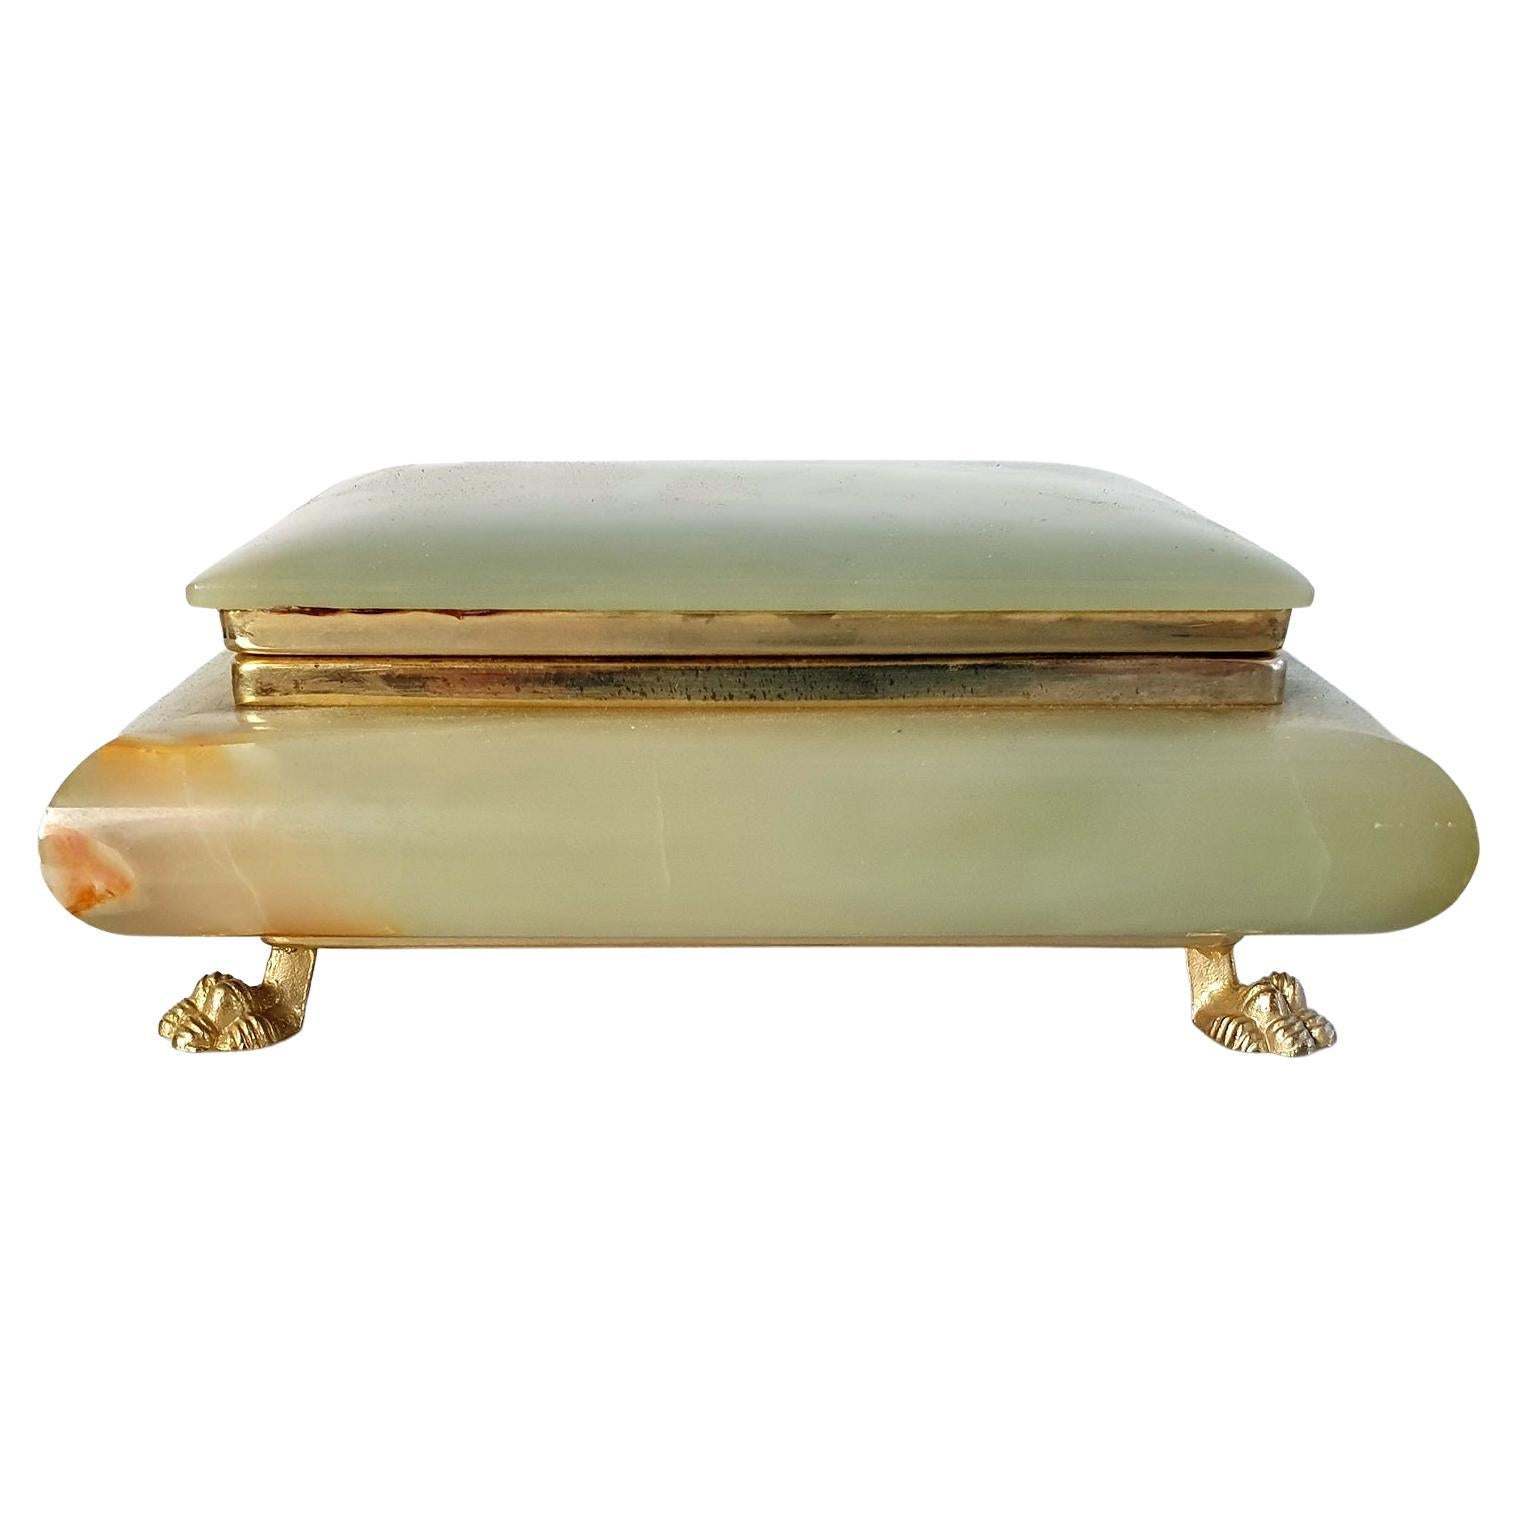 Large Italian Green Onyx Marble Box with Lionfeet